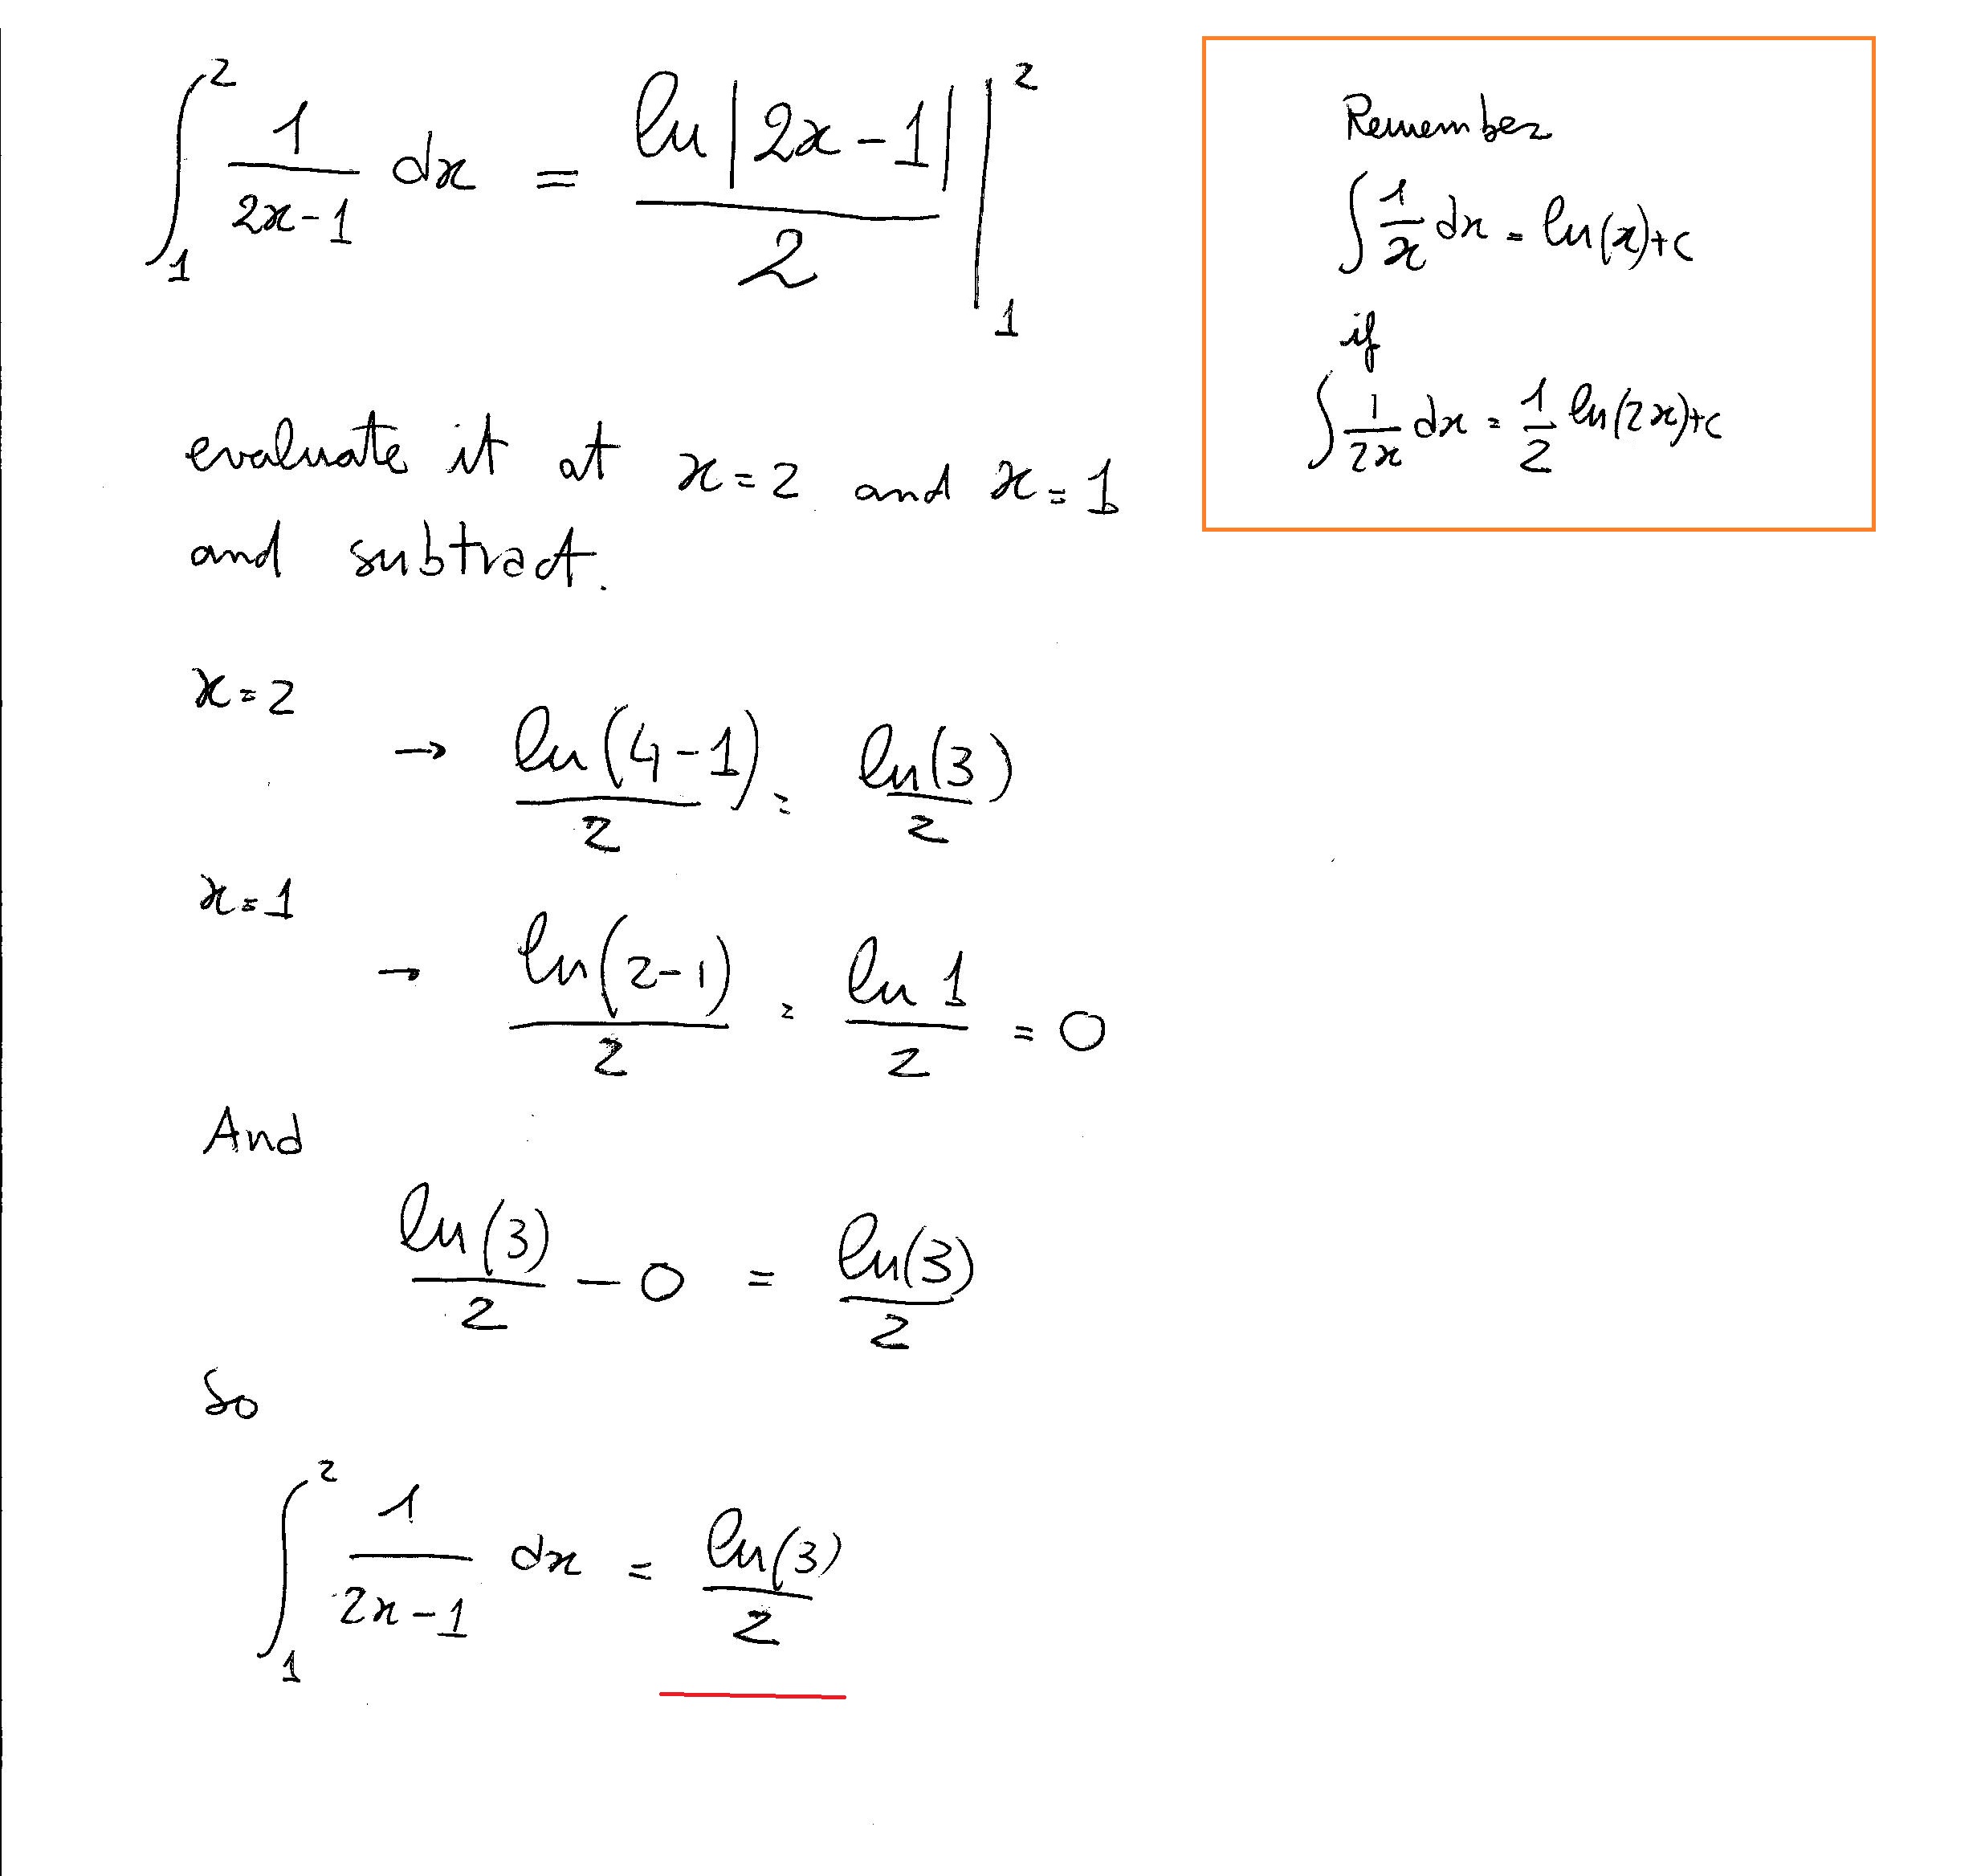 How do you evaluate the integral int 1/(2x1) from 1 to 2